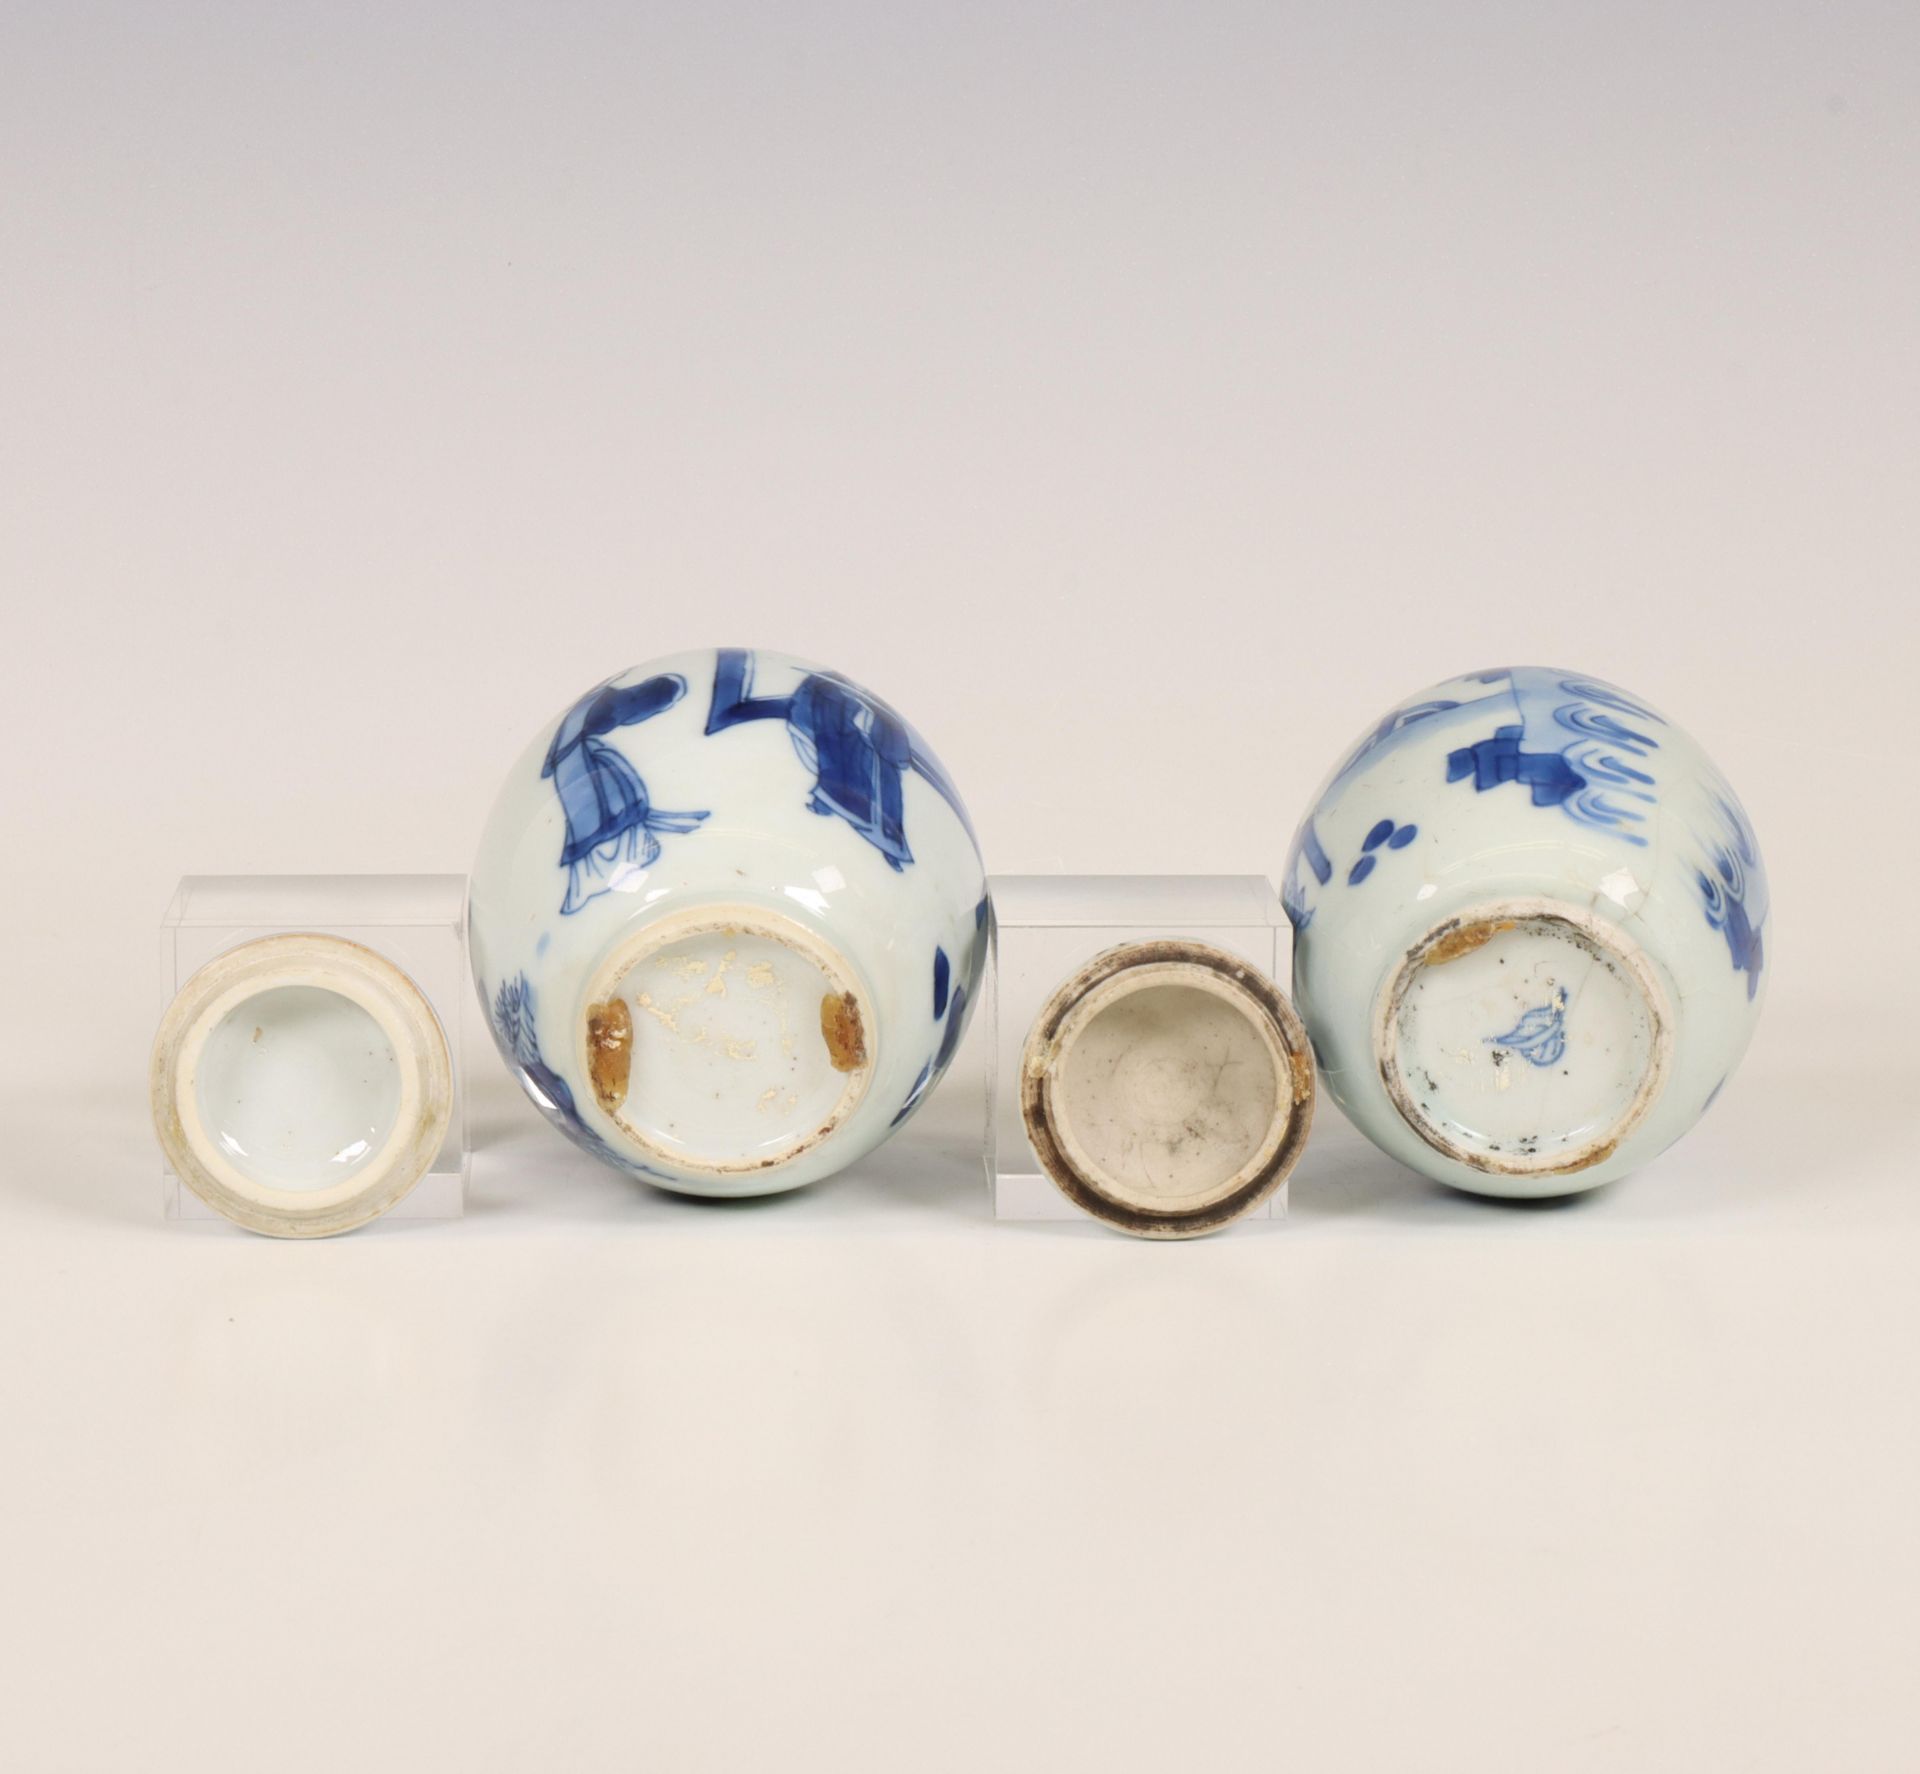 China, two blue and white porcelain tea-caddies and covers, Kangxi period (1662-1722), - Image 4 of 5